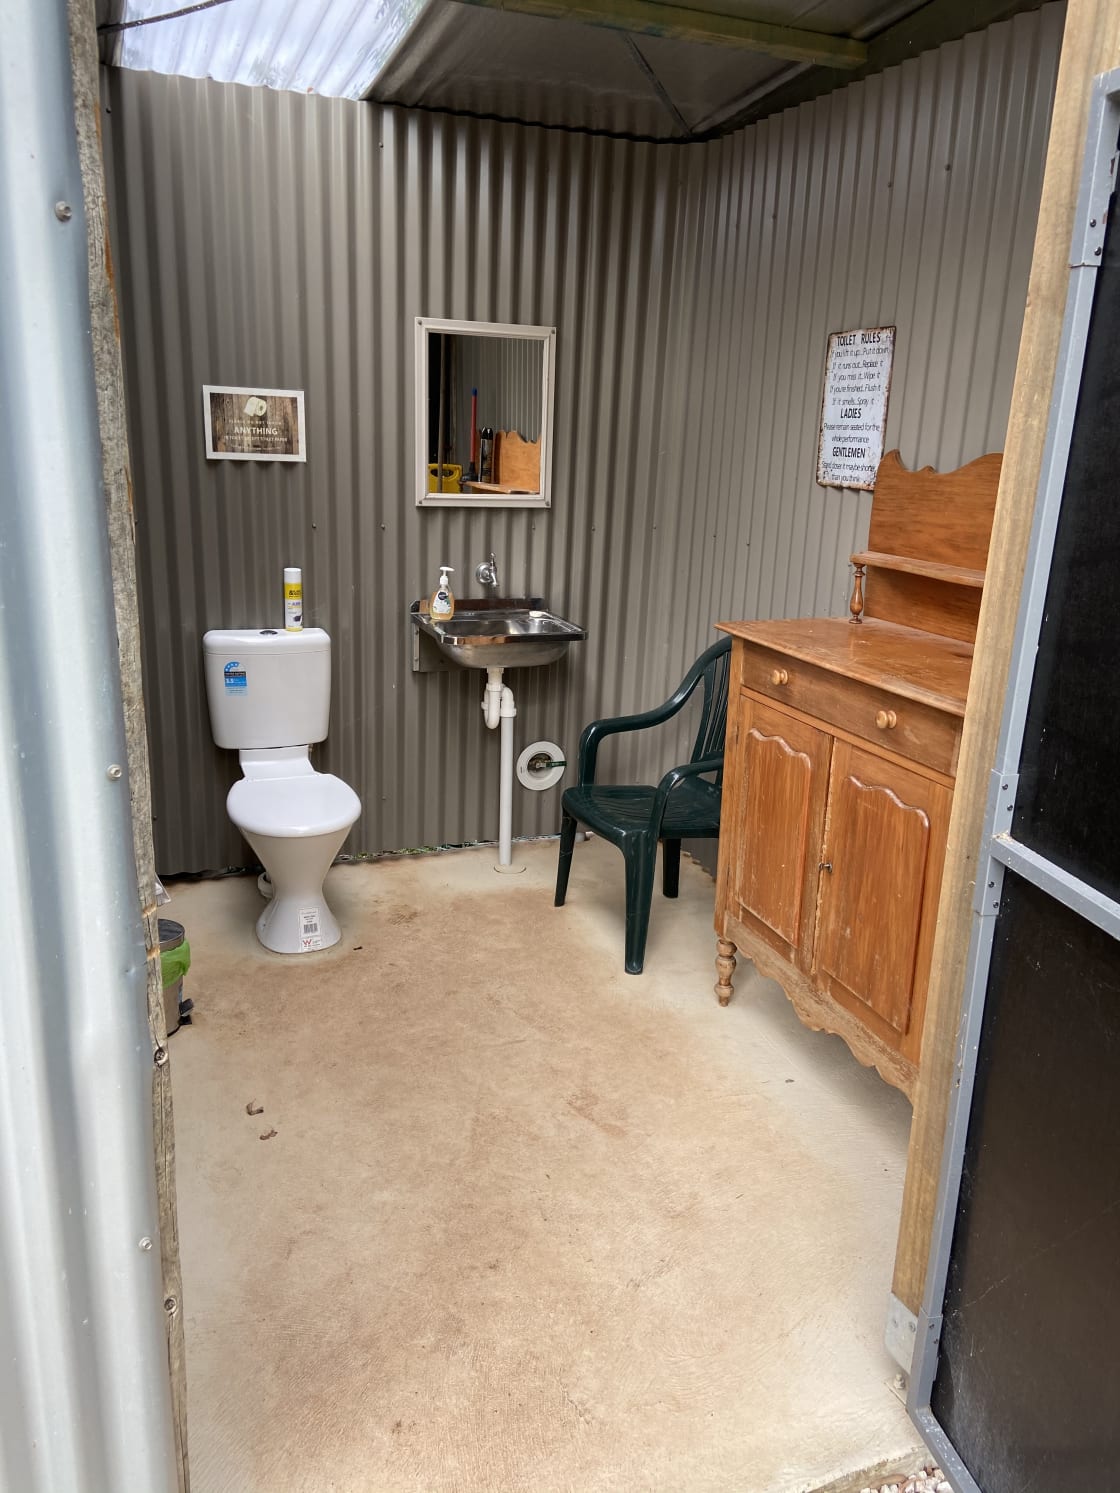 These toilets and showers were cleaned twice a day - hygienic and modern 